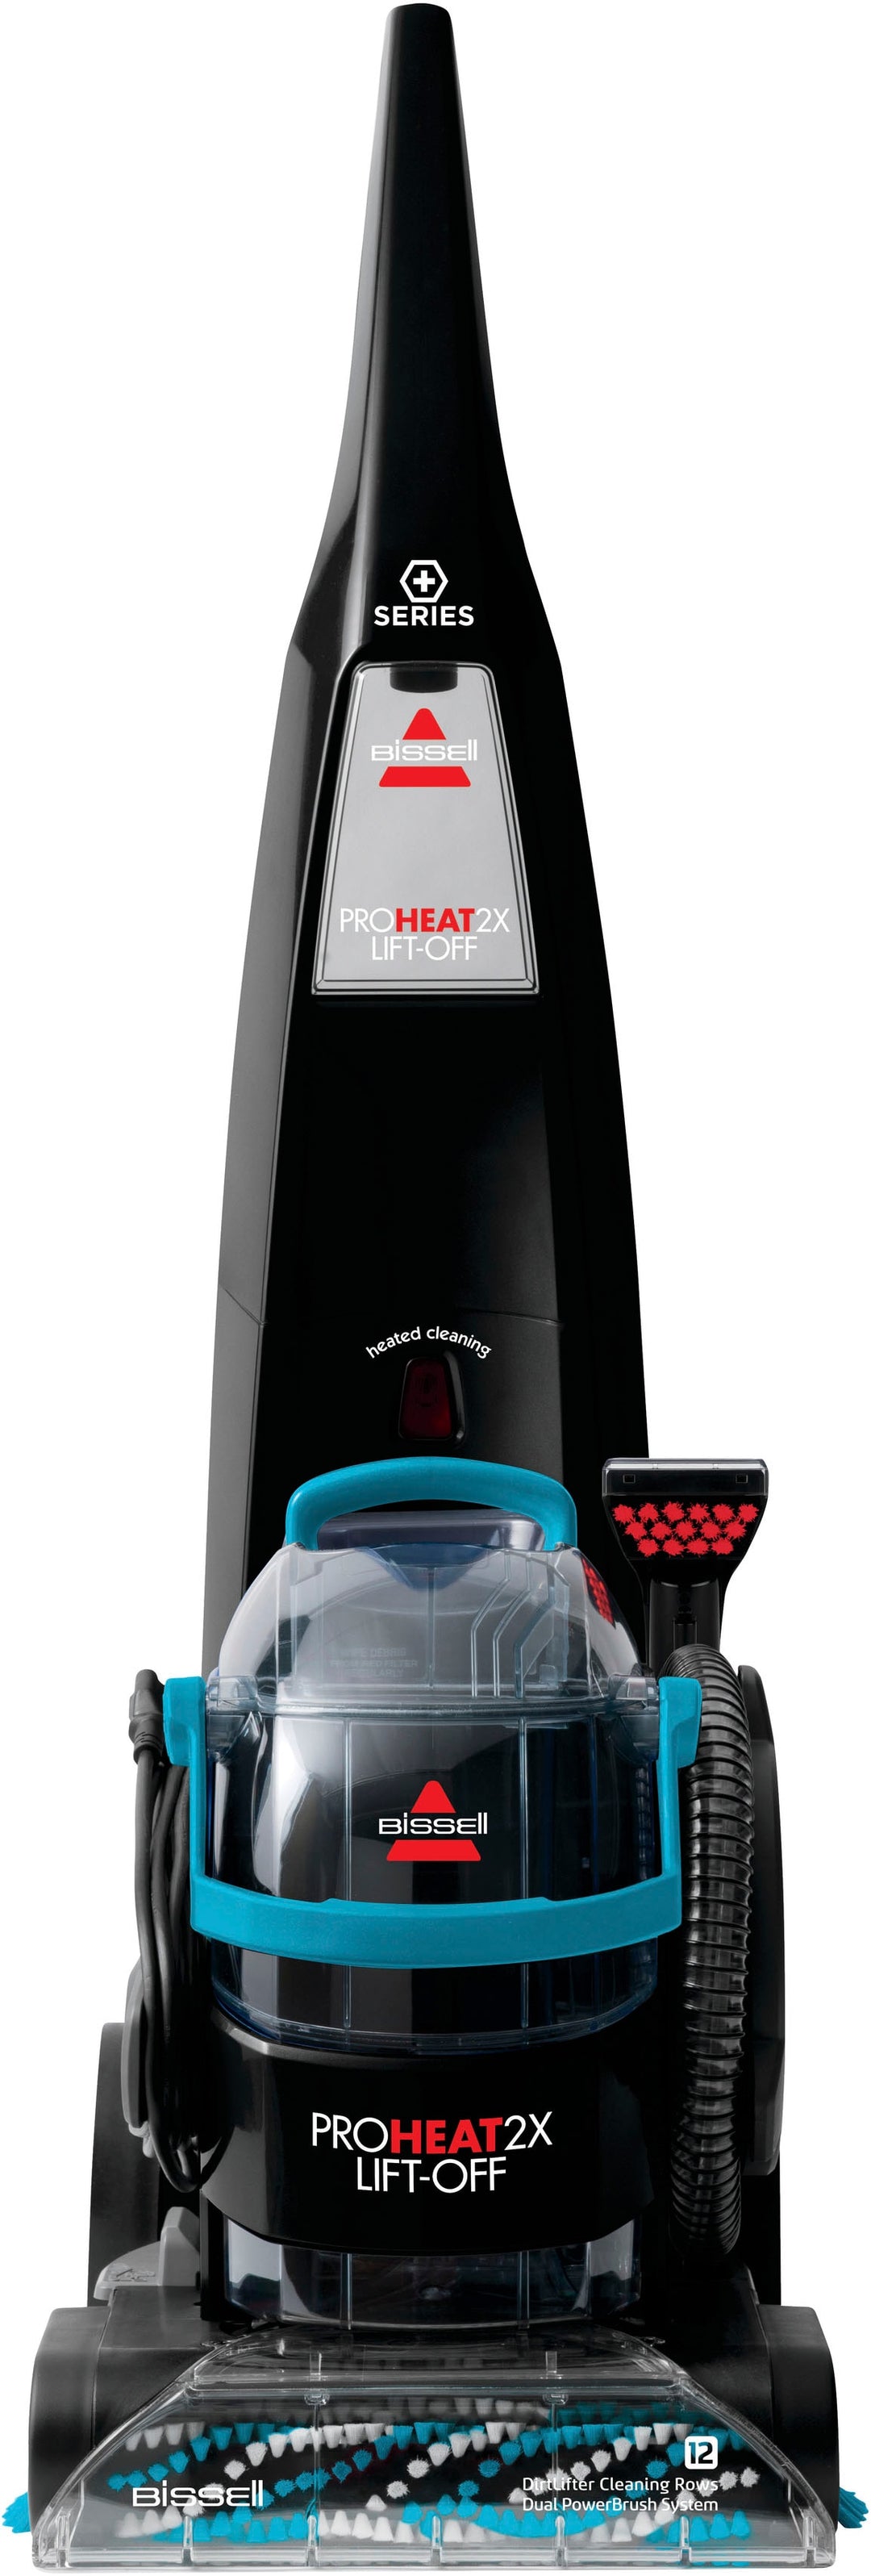 BISSELL - ProHeat 2X Lift-Off  Upright Deep Cleaner - Titanium and Teal_0